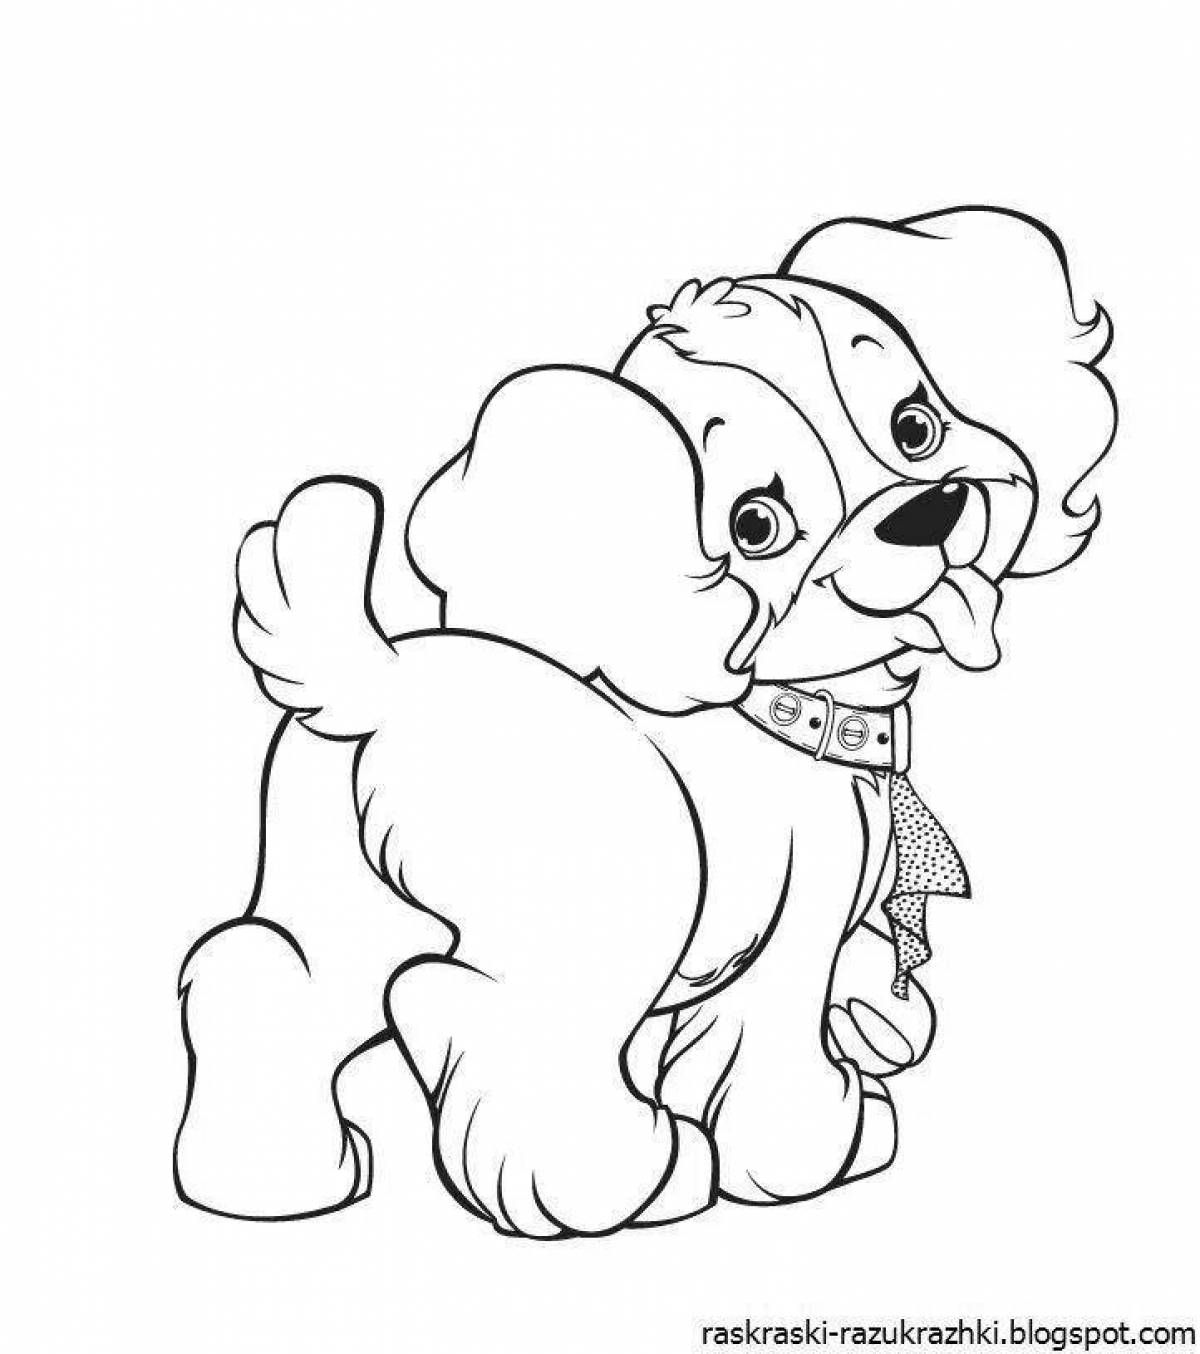 Cute puppy coloring book for kids